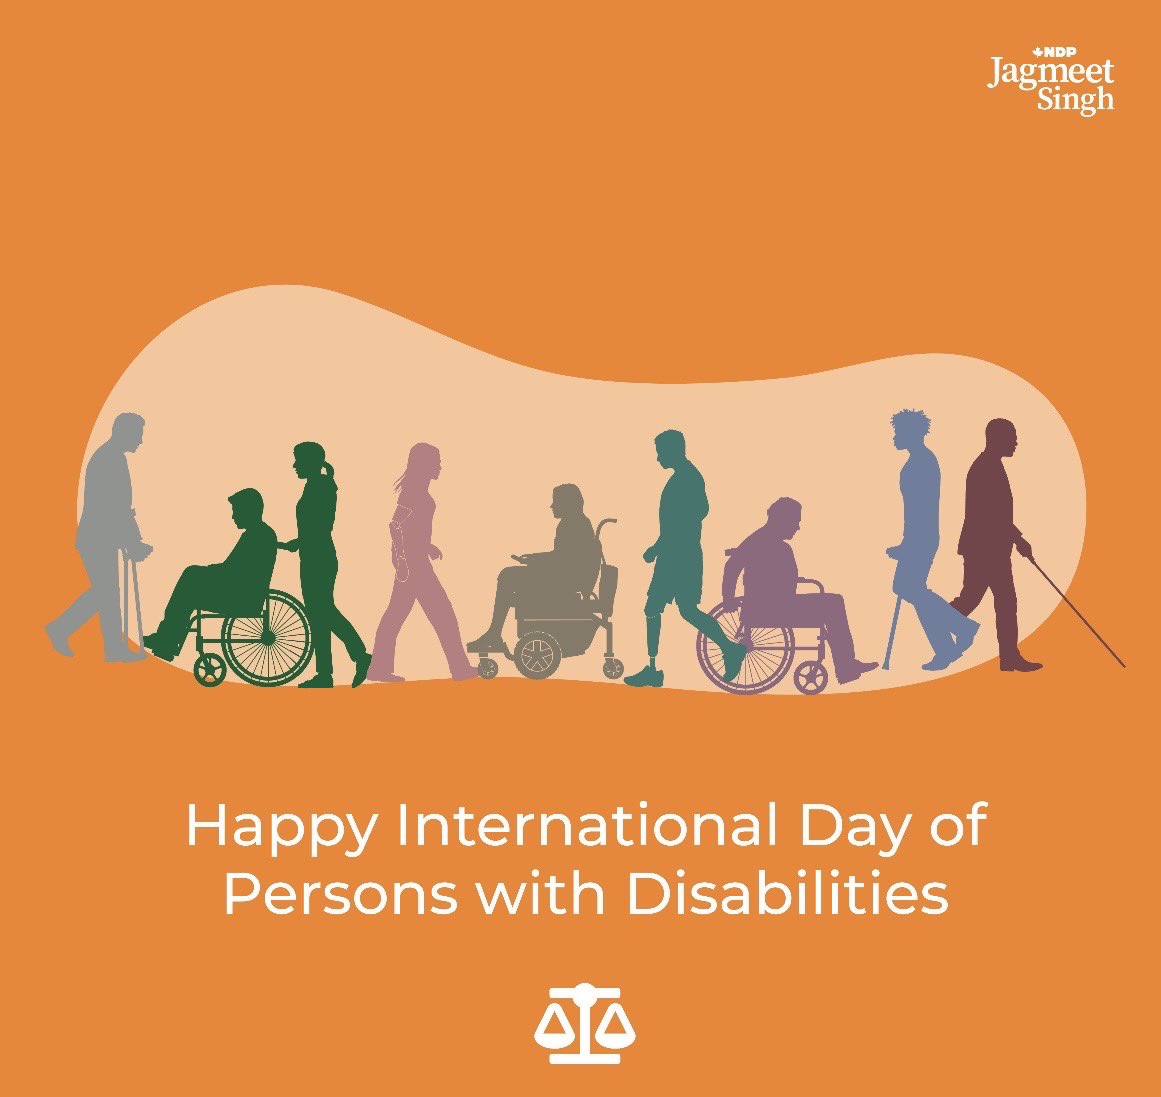 Today is #InternationalDayOfPersonsWithDisabilities, a day to commit to inclusion & equity for all. Canada's commitment to the Convention on the Rights of Persons with Disabilities must be fulfilled yet consecutive Conservative and Liberal Federal Governements have left those…